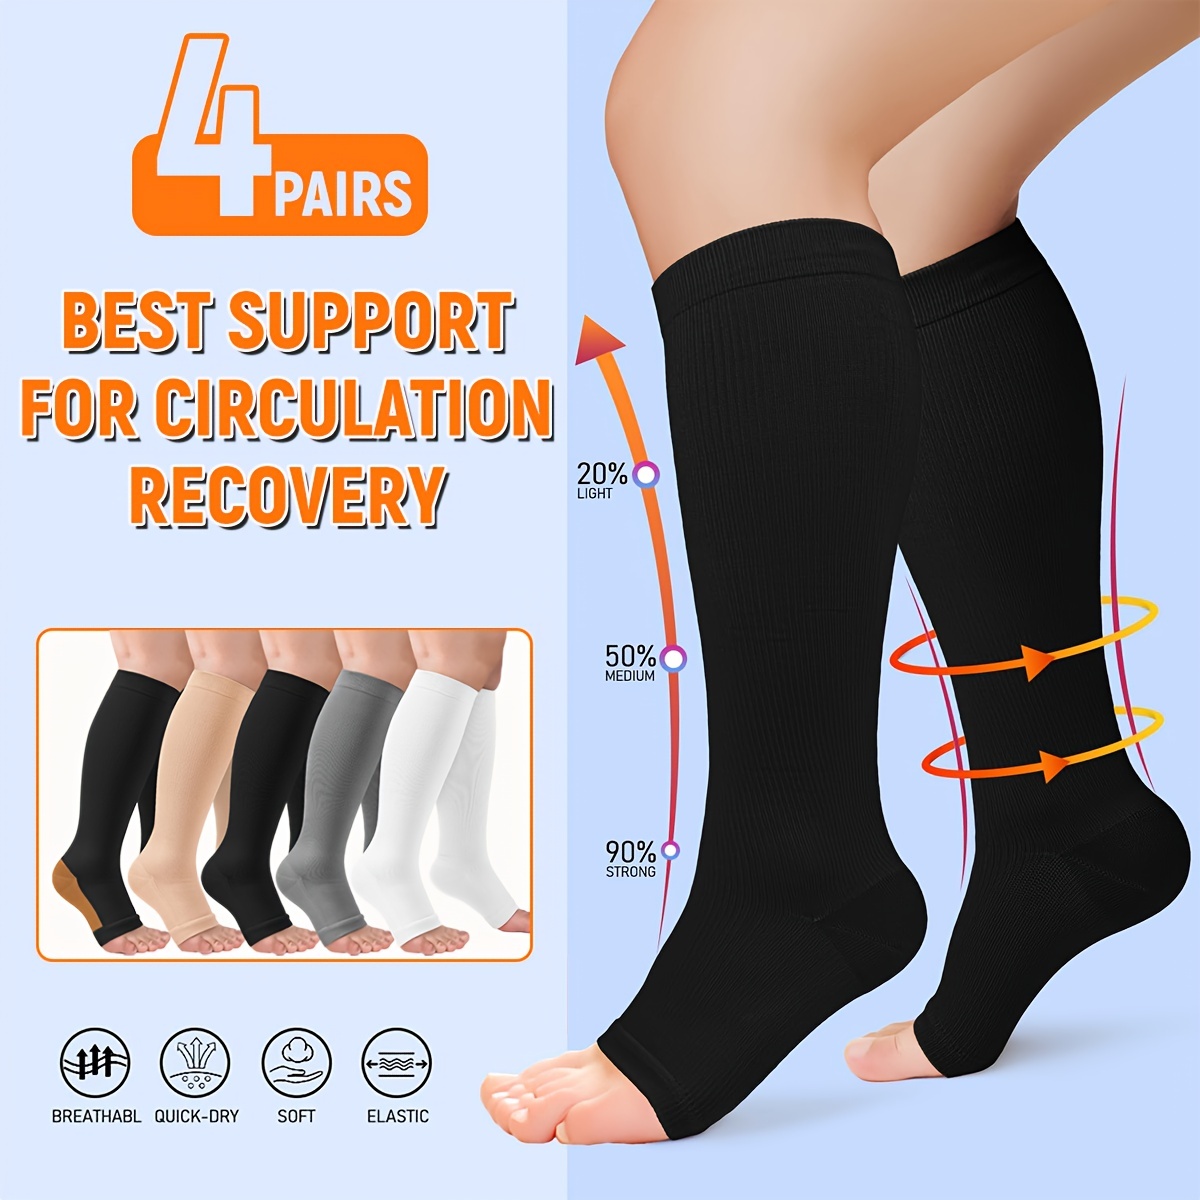 Copper Compression Socks - Suitable for Athletics, Tennis, Golf,  Basketball, Sports, Weightlifting, Joint Pain Relief, Injury Recovery (One  Pair)